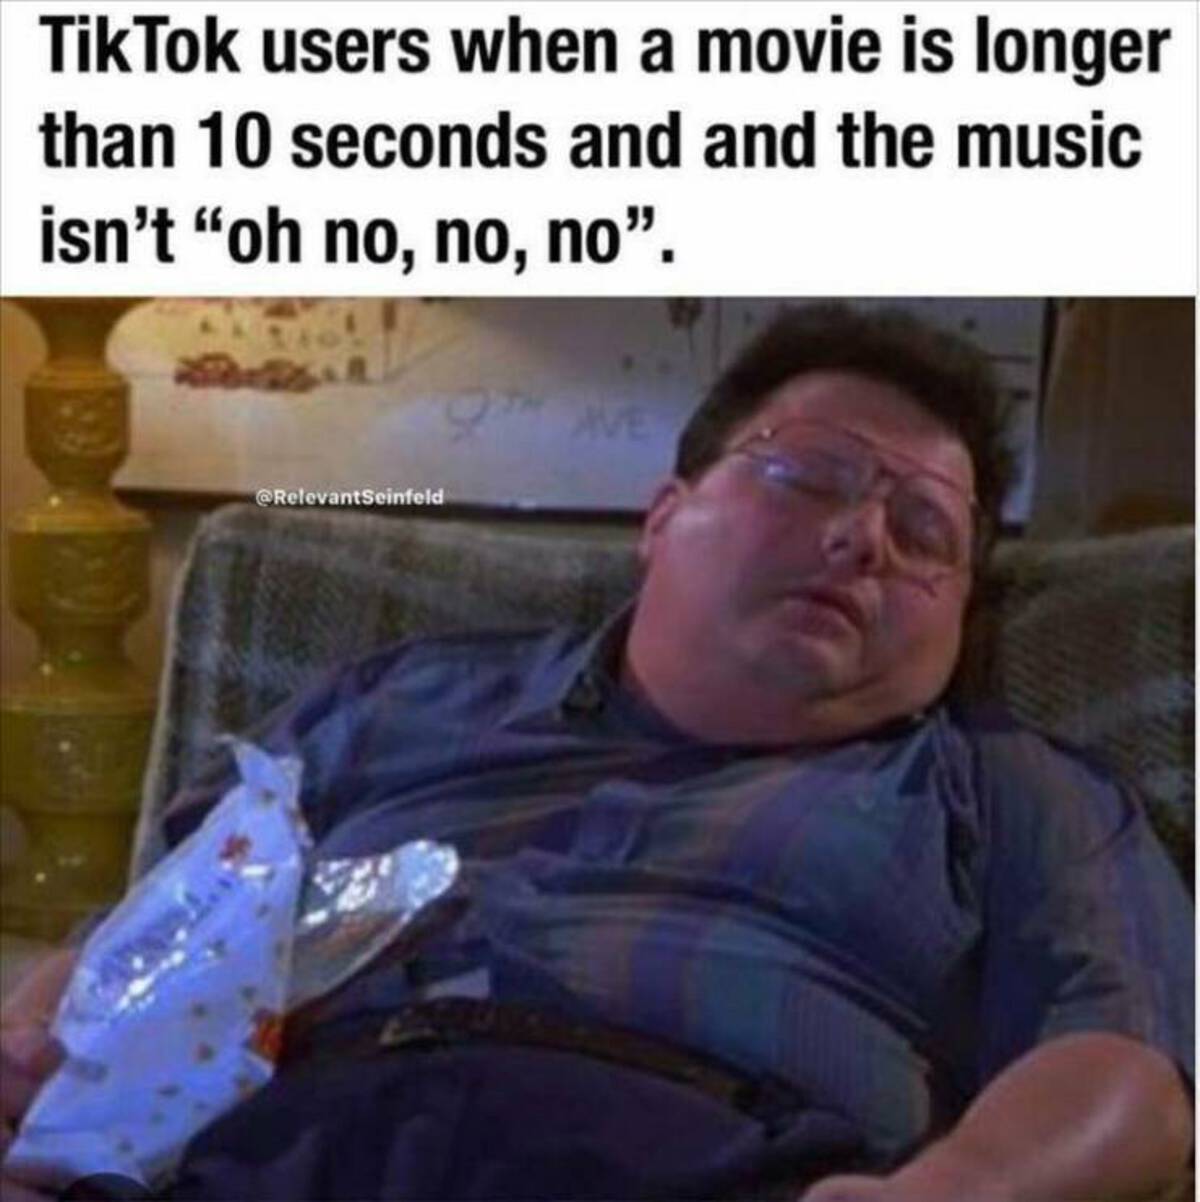 tiktok users movie meme - TikTok users when a movie is longer than 10 seconds and and the music isn't "oh no, no, no". Ave